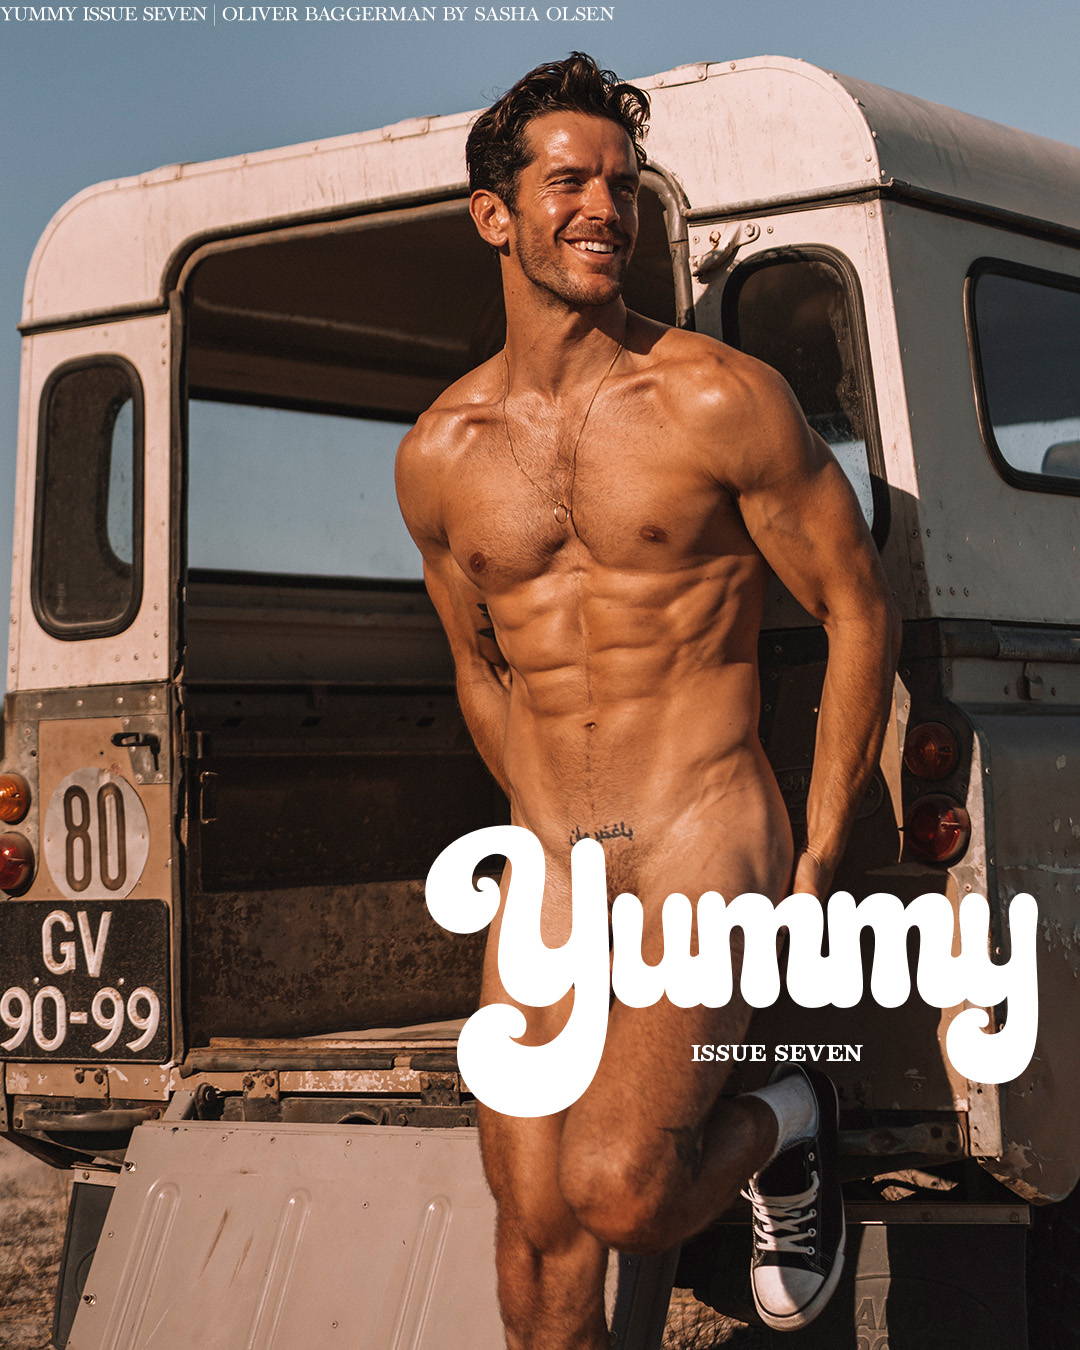 Cover star for Yummy 7, Oliver Baggerman, takes time out of his front-of-camera schedule to sit with Yummy. Discussing a career that has spanned over 15 years so far, Oliver is a tapestry woven with passions for sports, adventure and other yummy topics. 